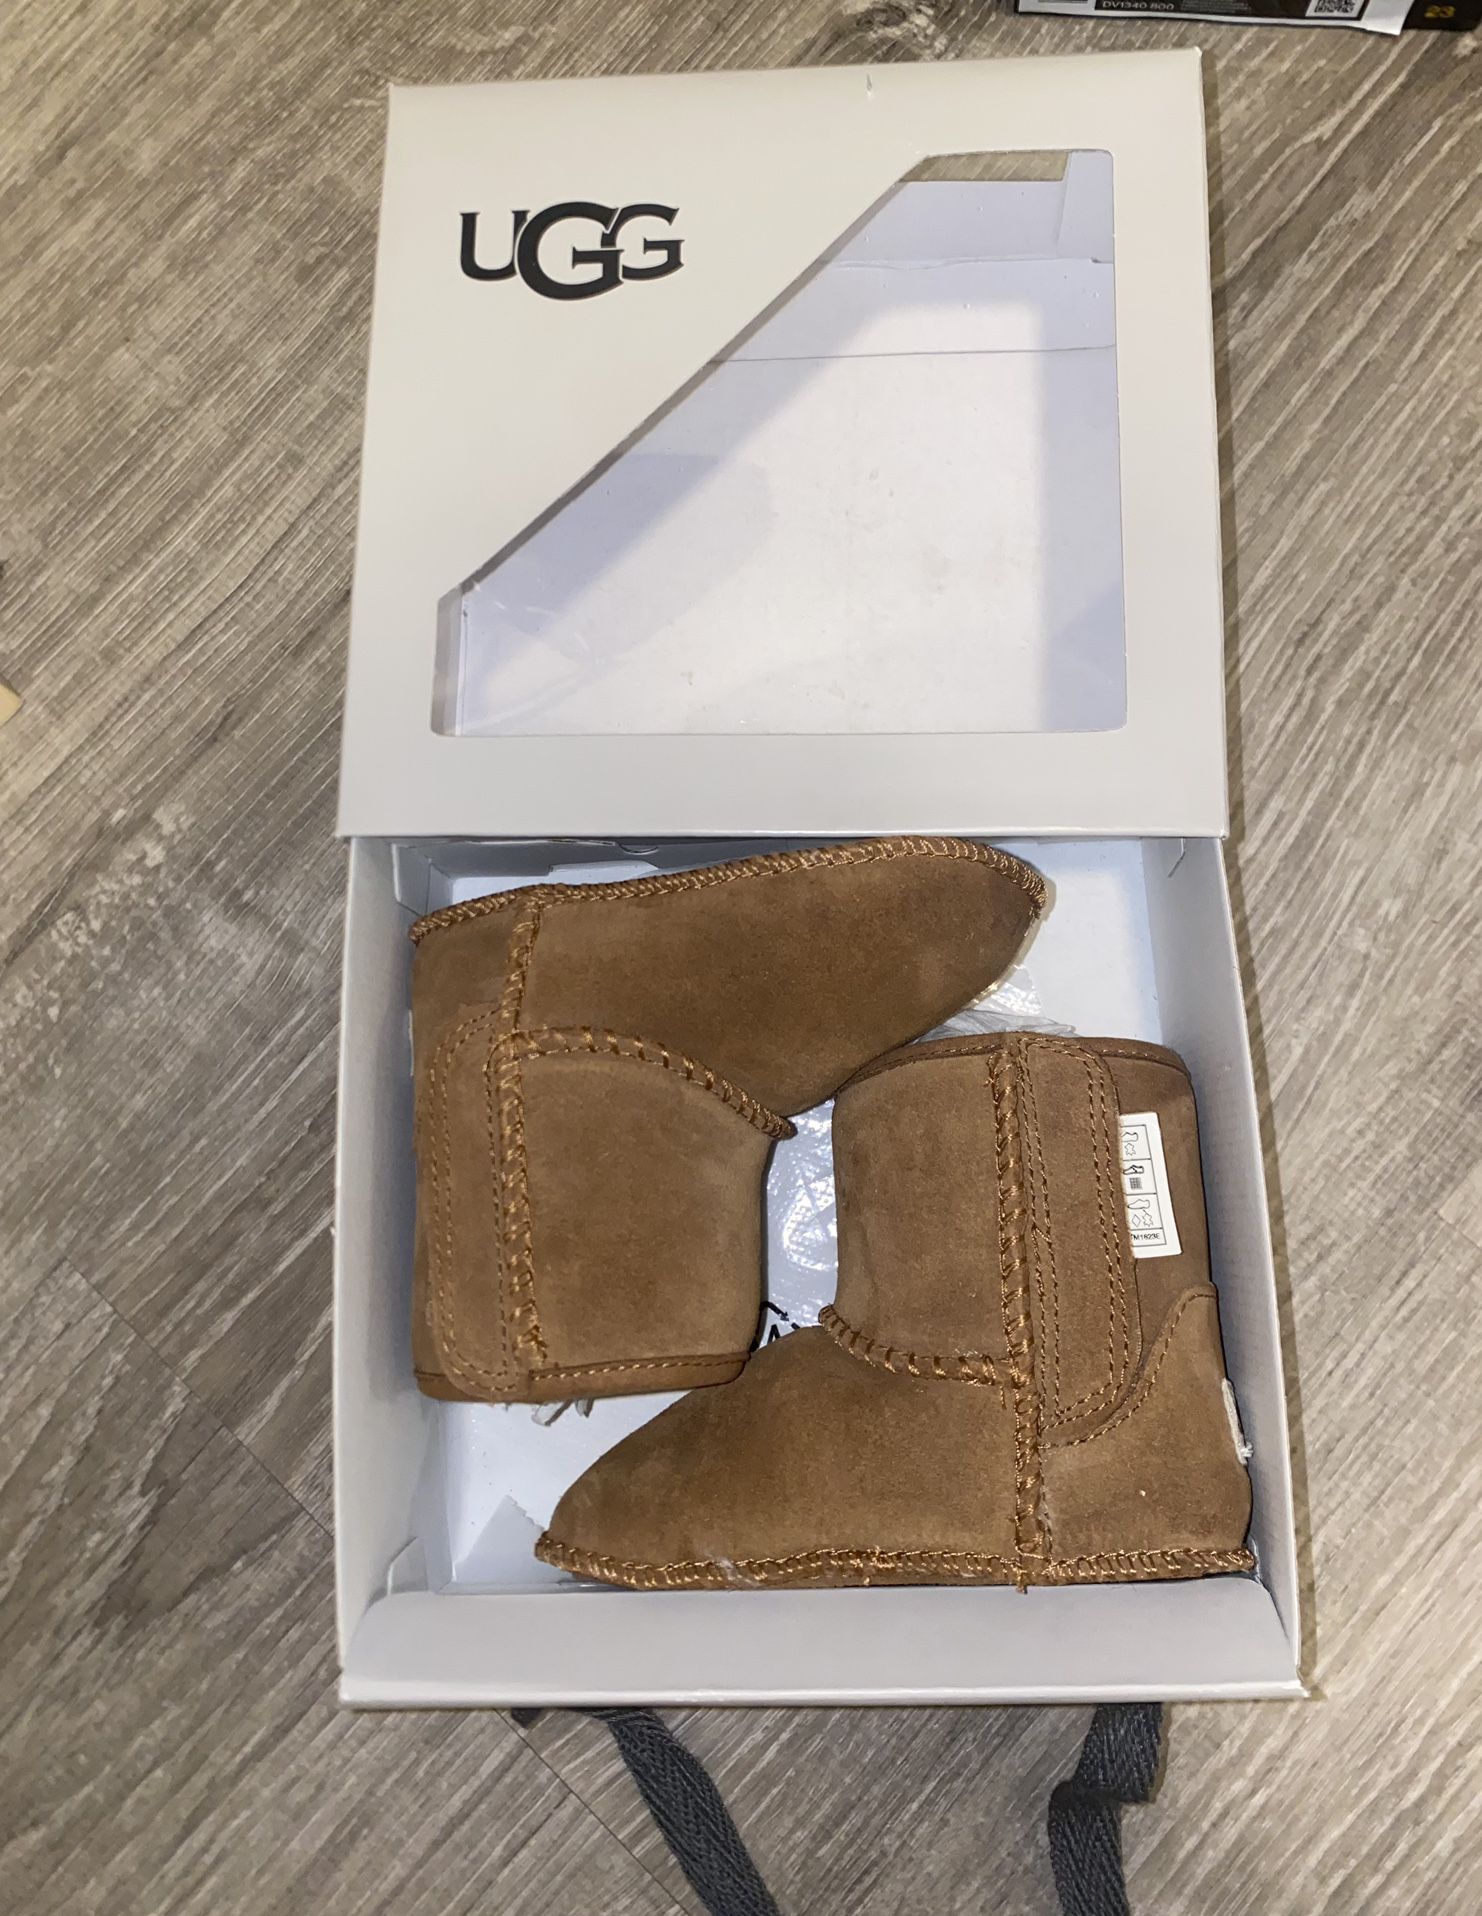 Baby Classic UGG boots